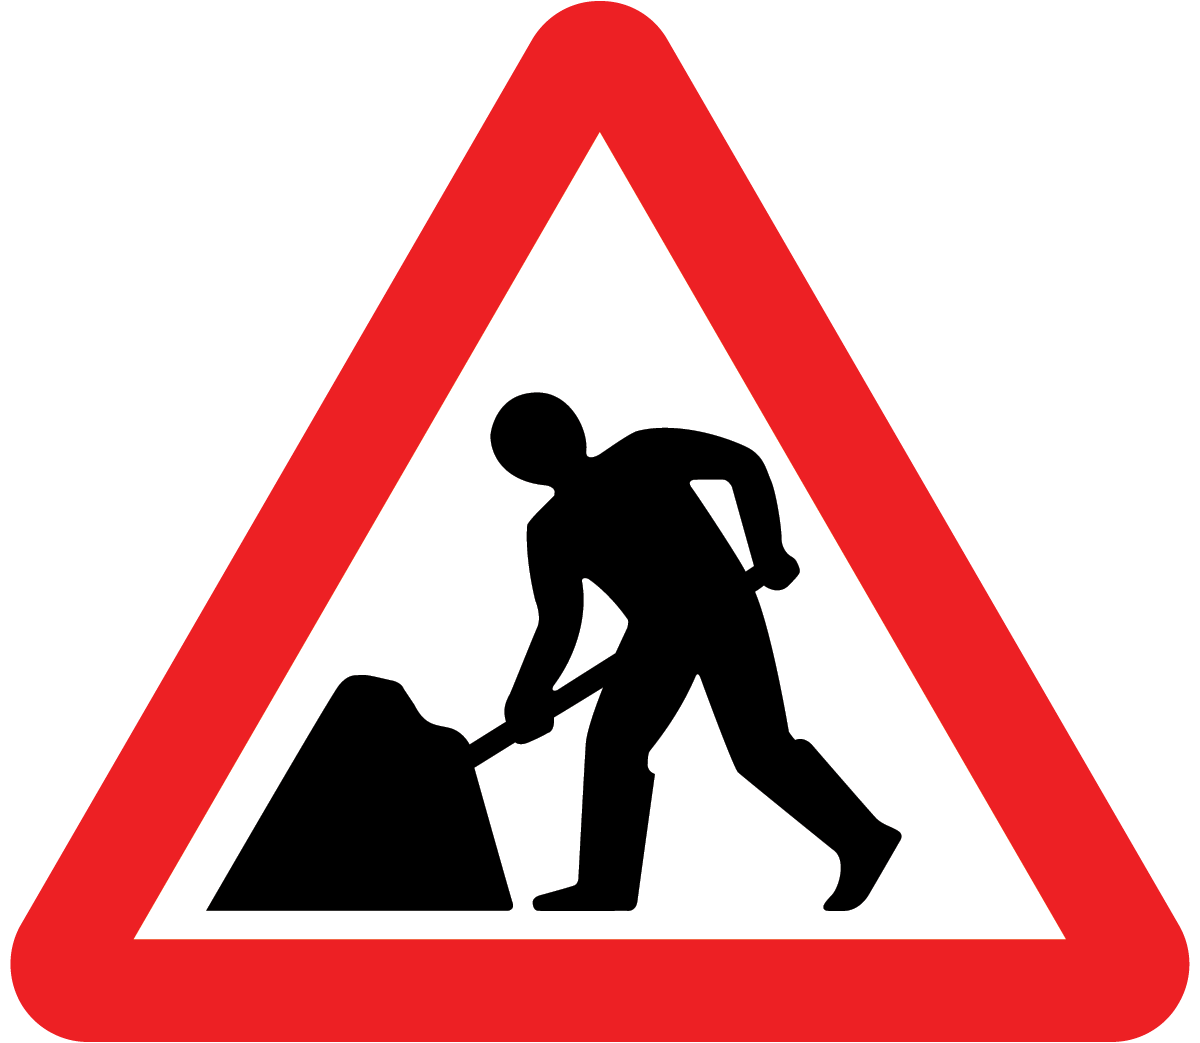 Road works sign - Theory Test